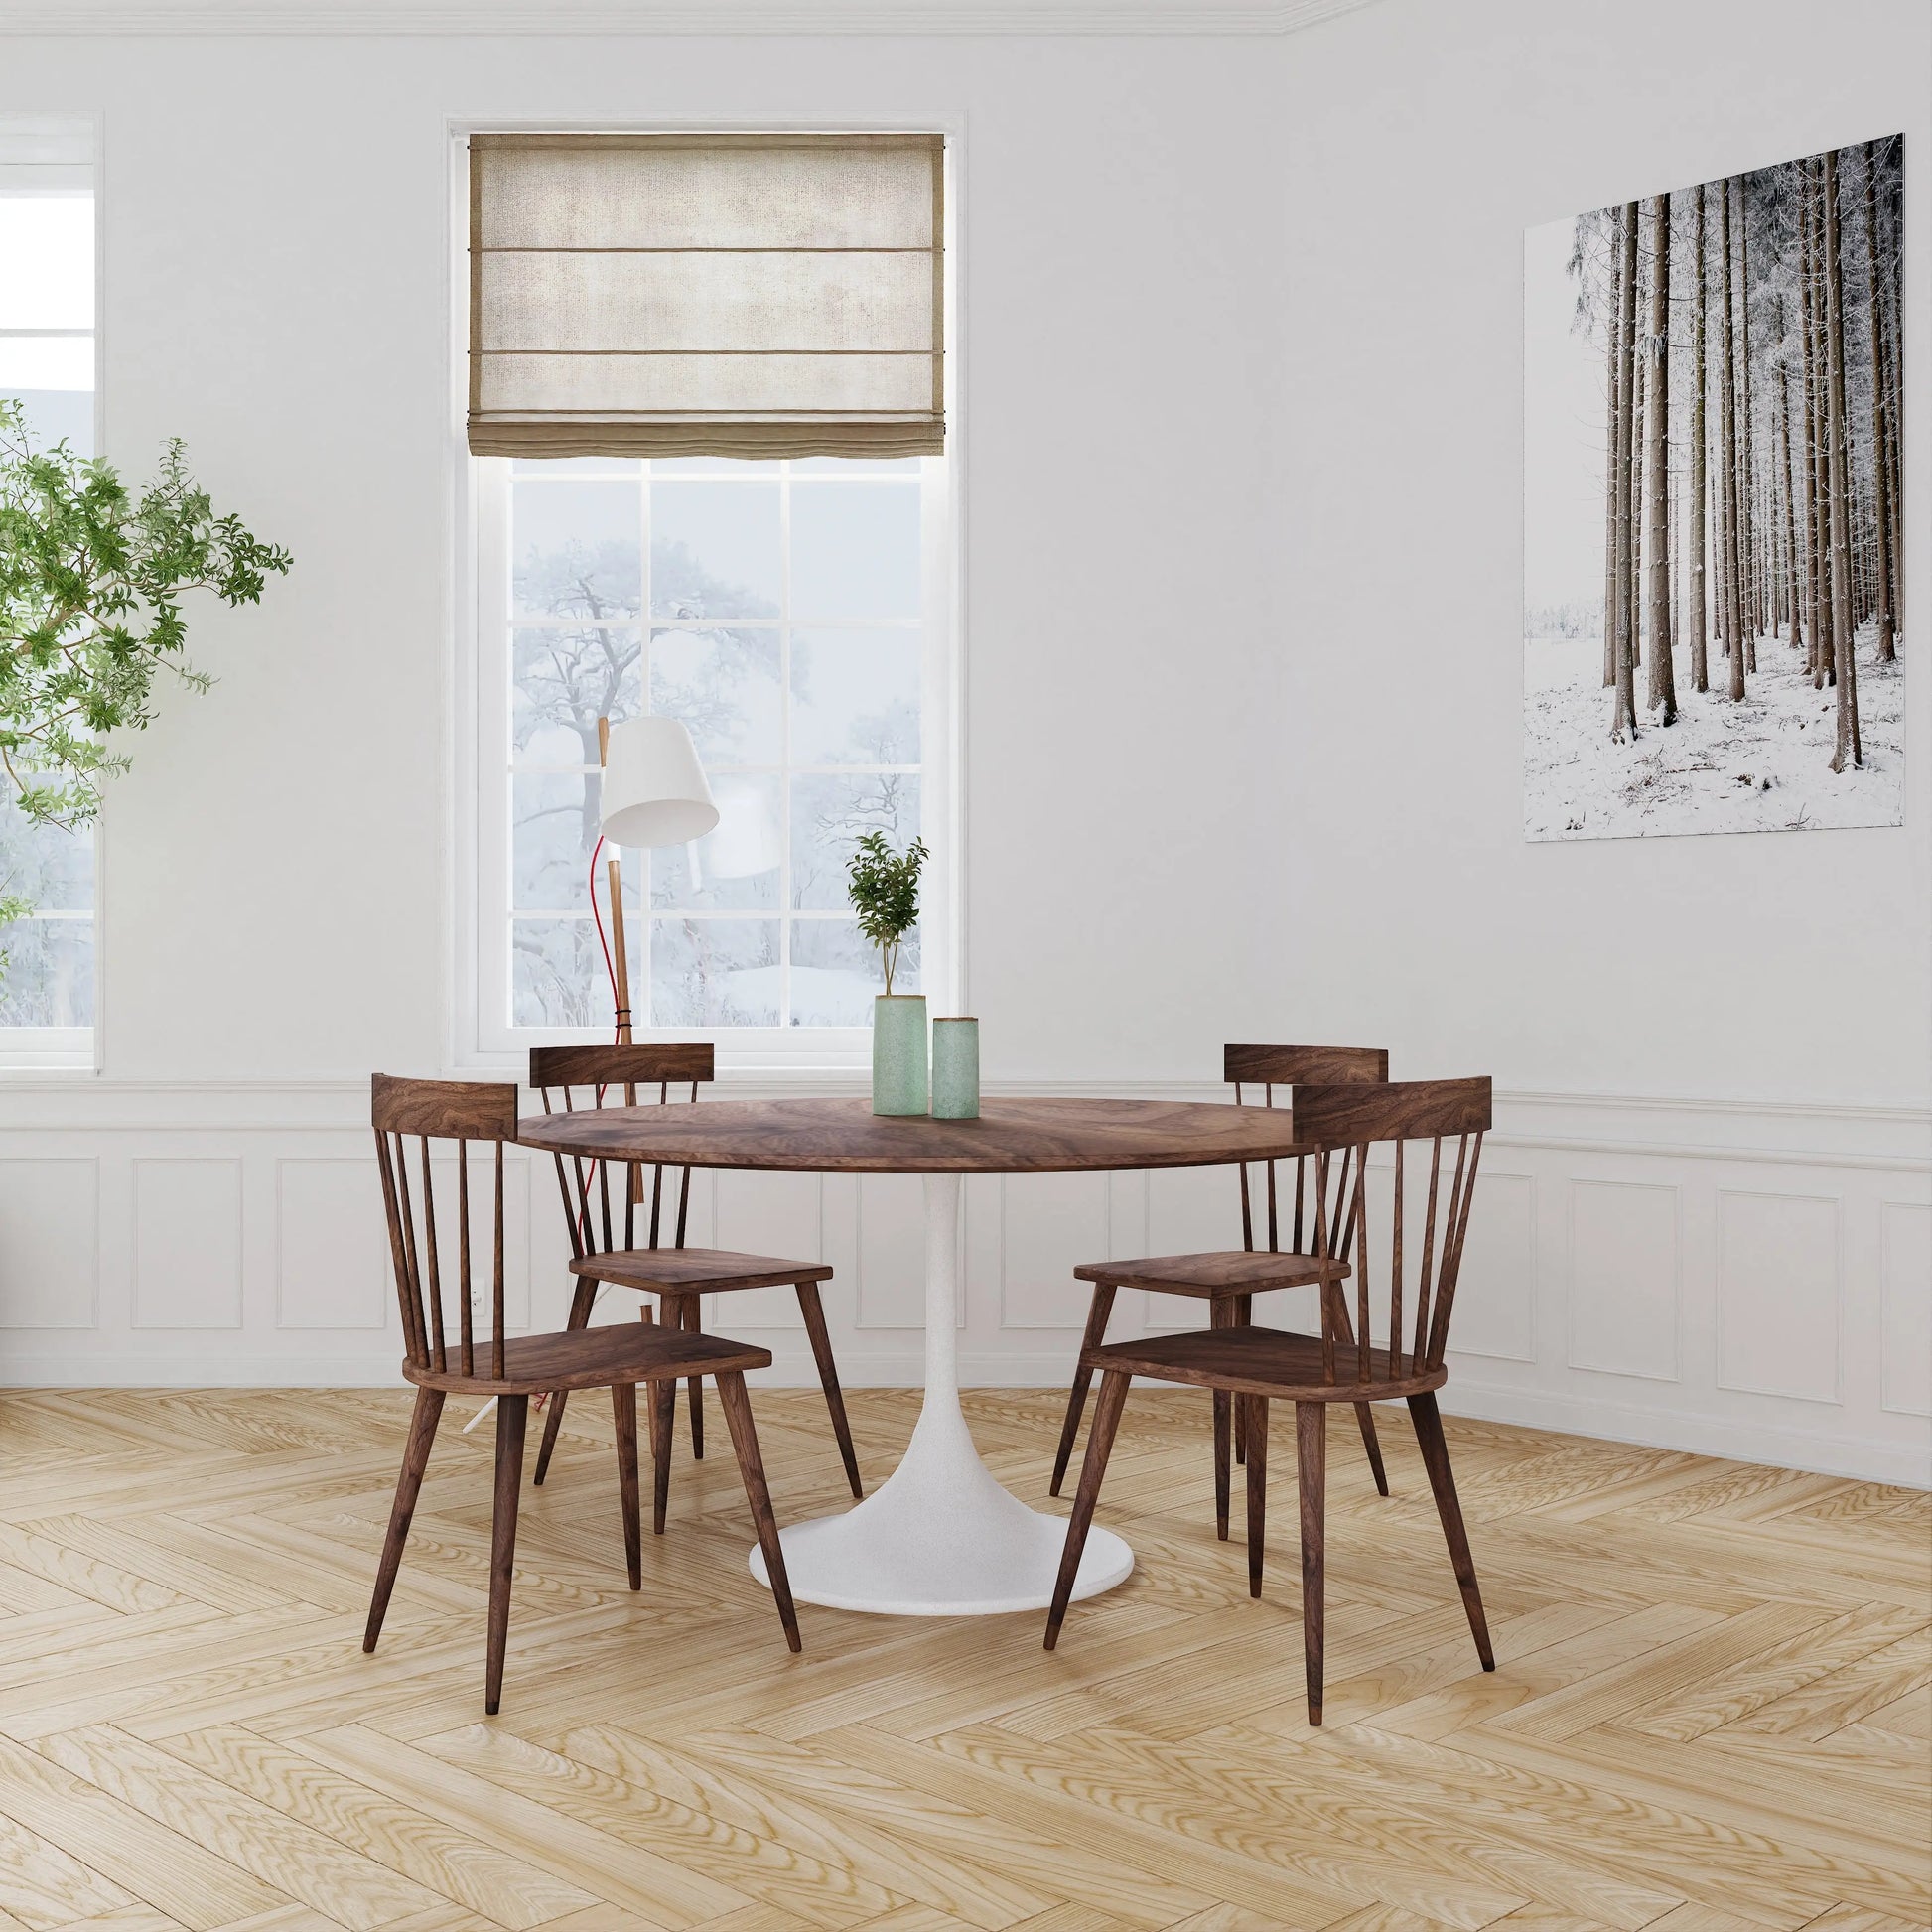 The Railay: Modern Round Dining Table Moderncre8ve